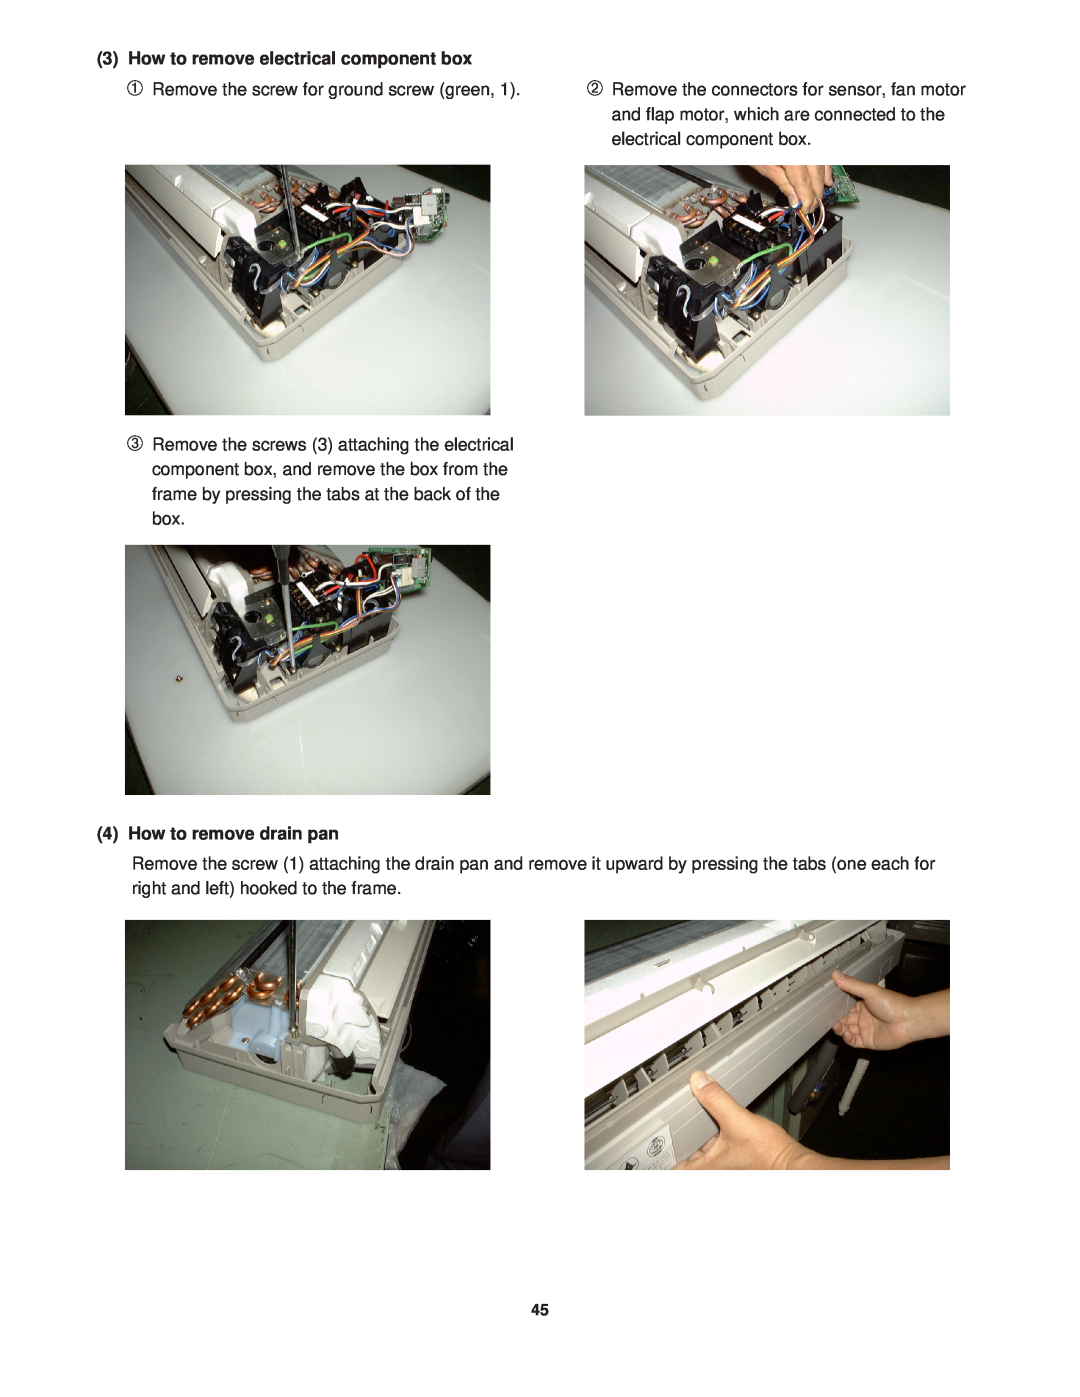 Sanyo KGS1411, CG1411 service manual 3How to remove electrical component box, How to remove drain pan 